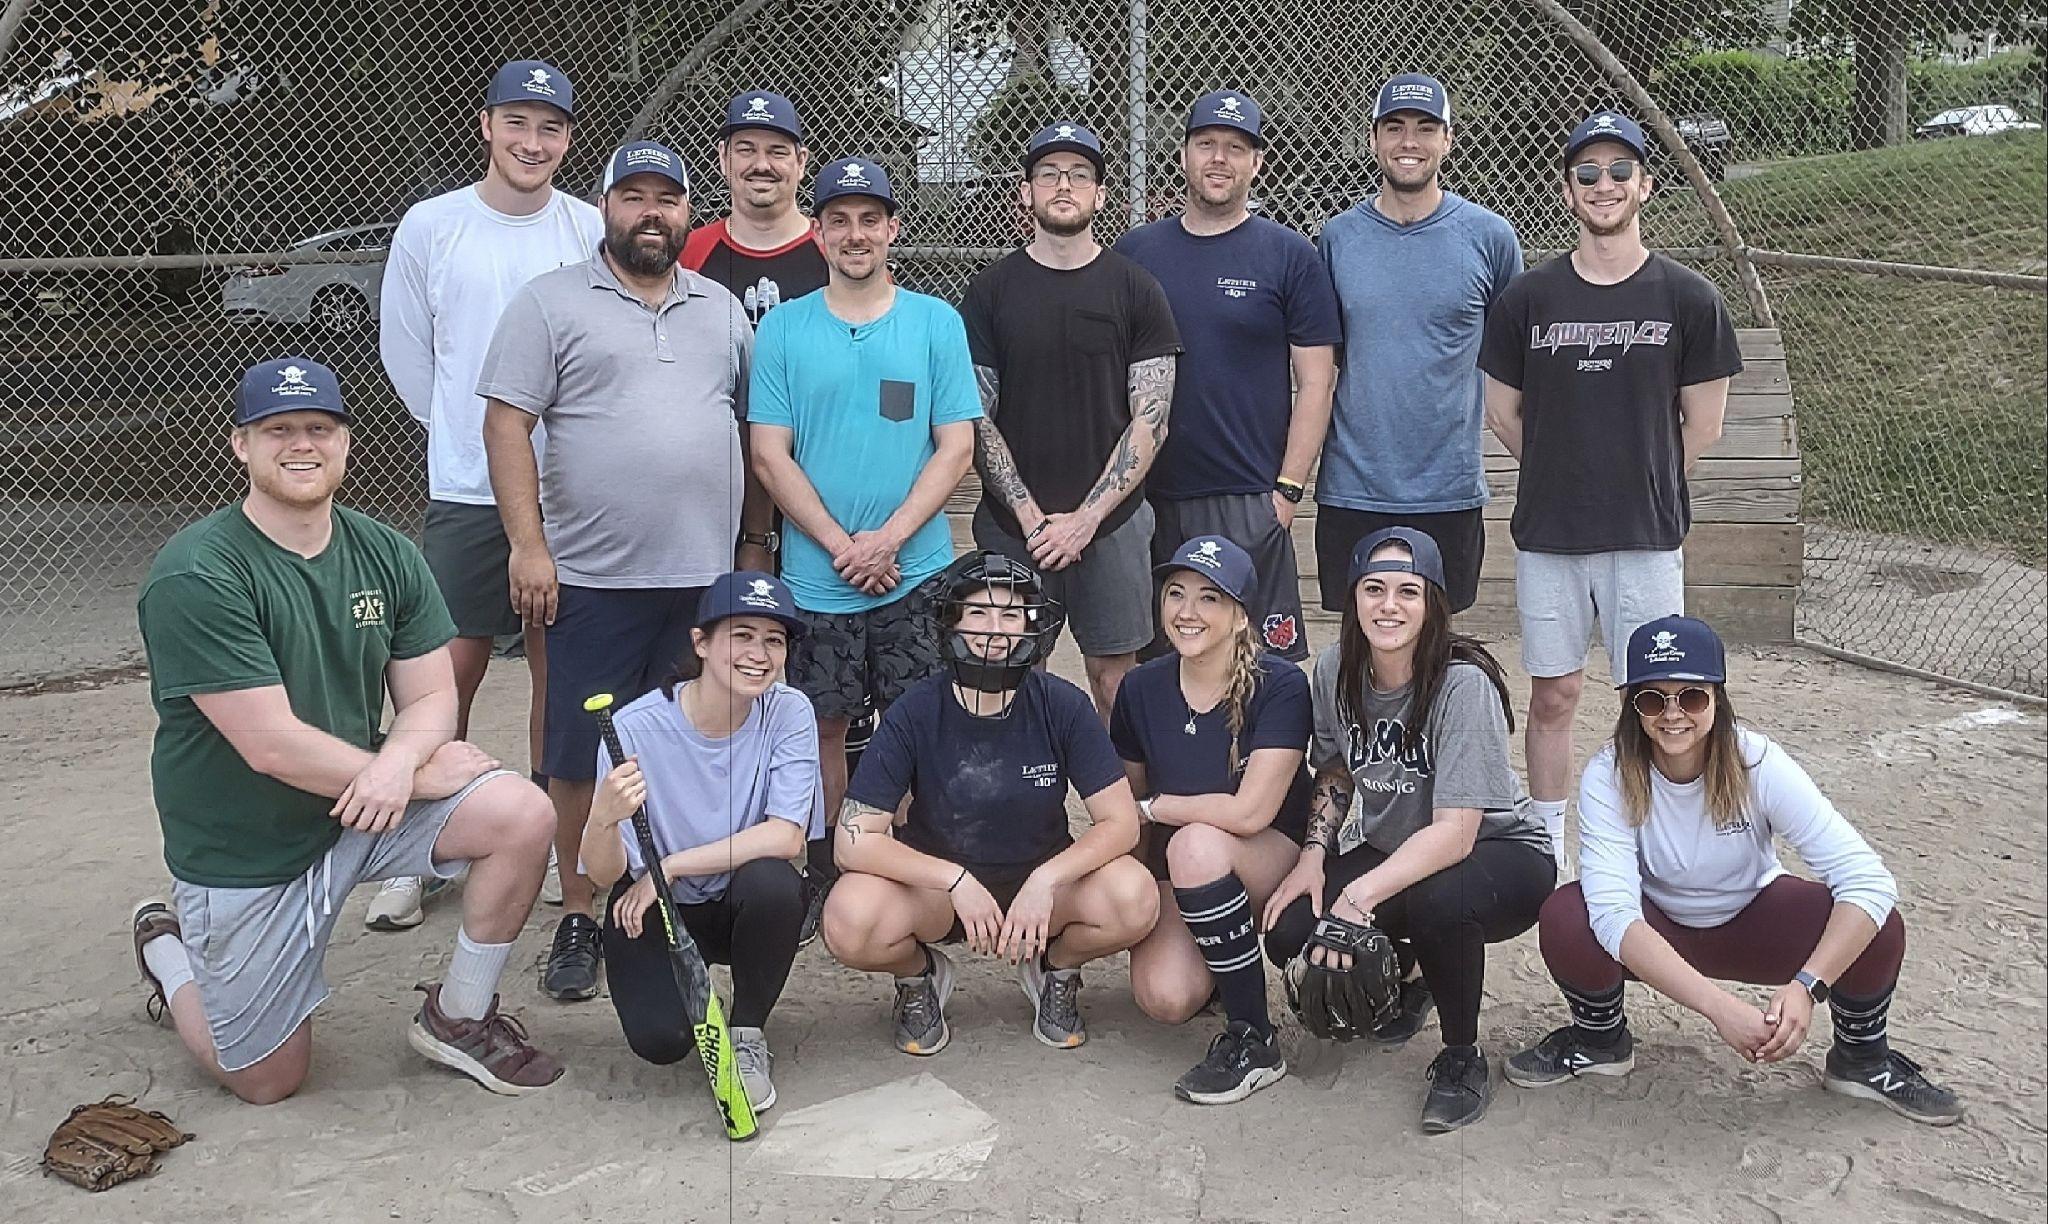 Lether Law Group Enjoying our Annual Softball team games together.